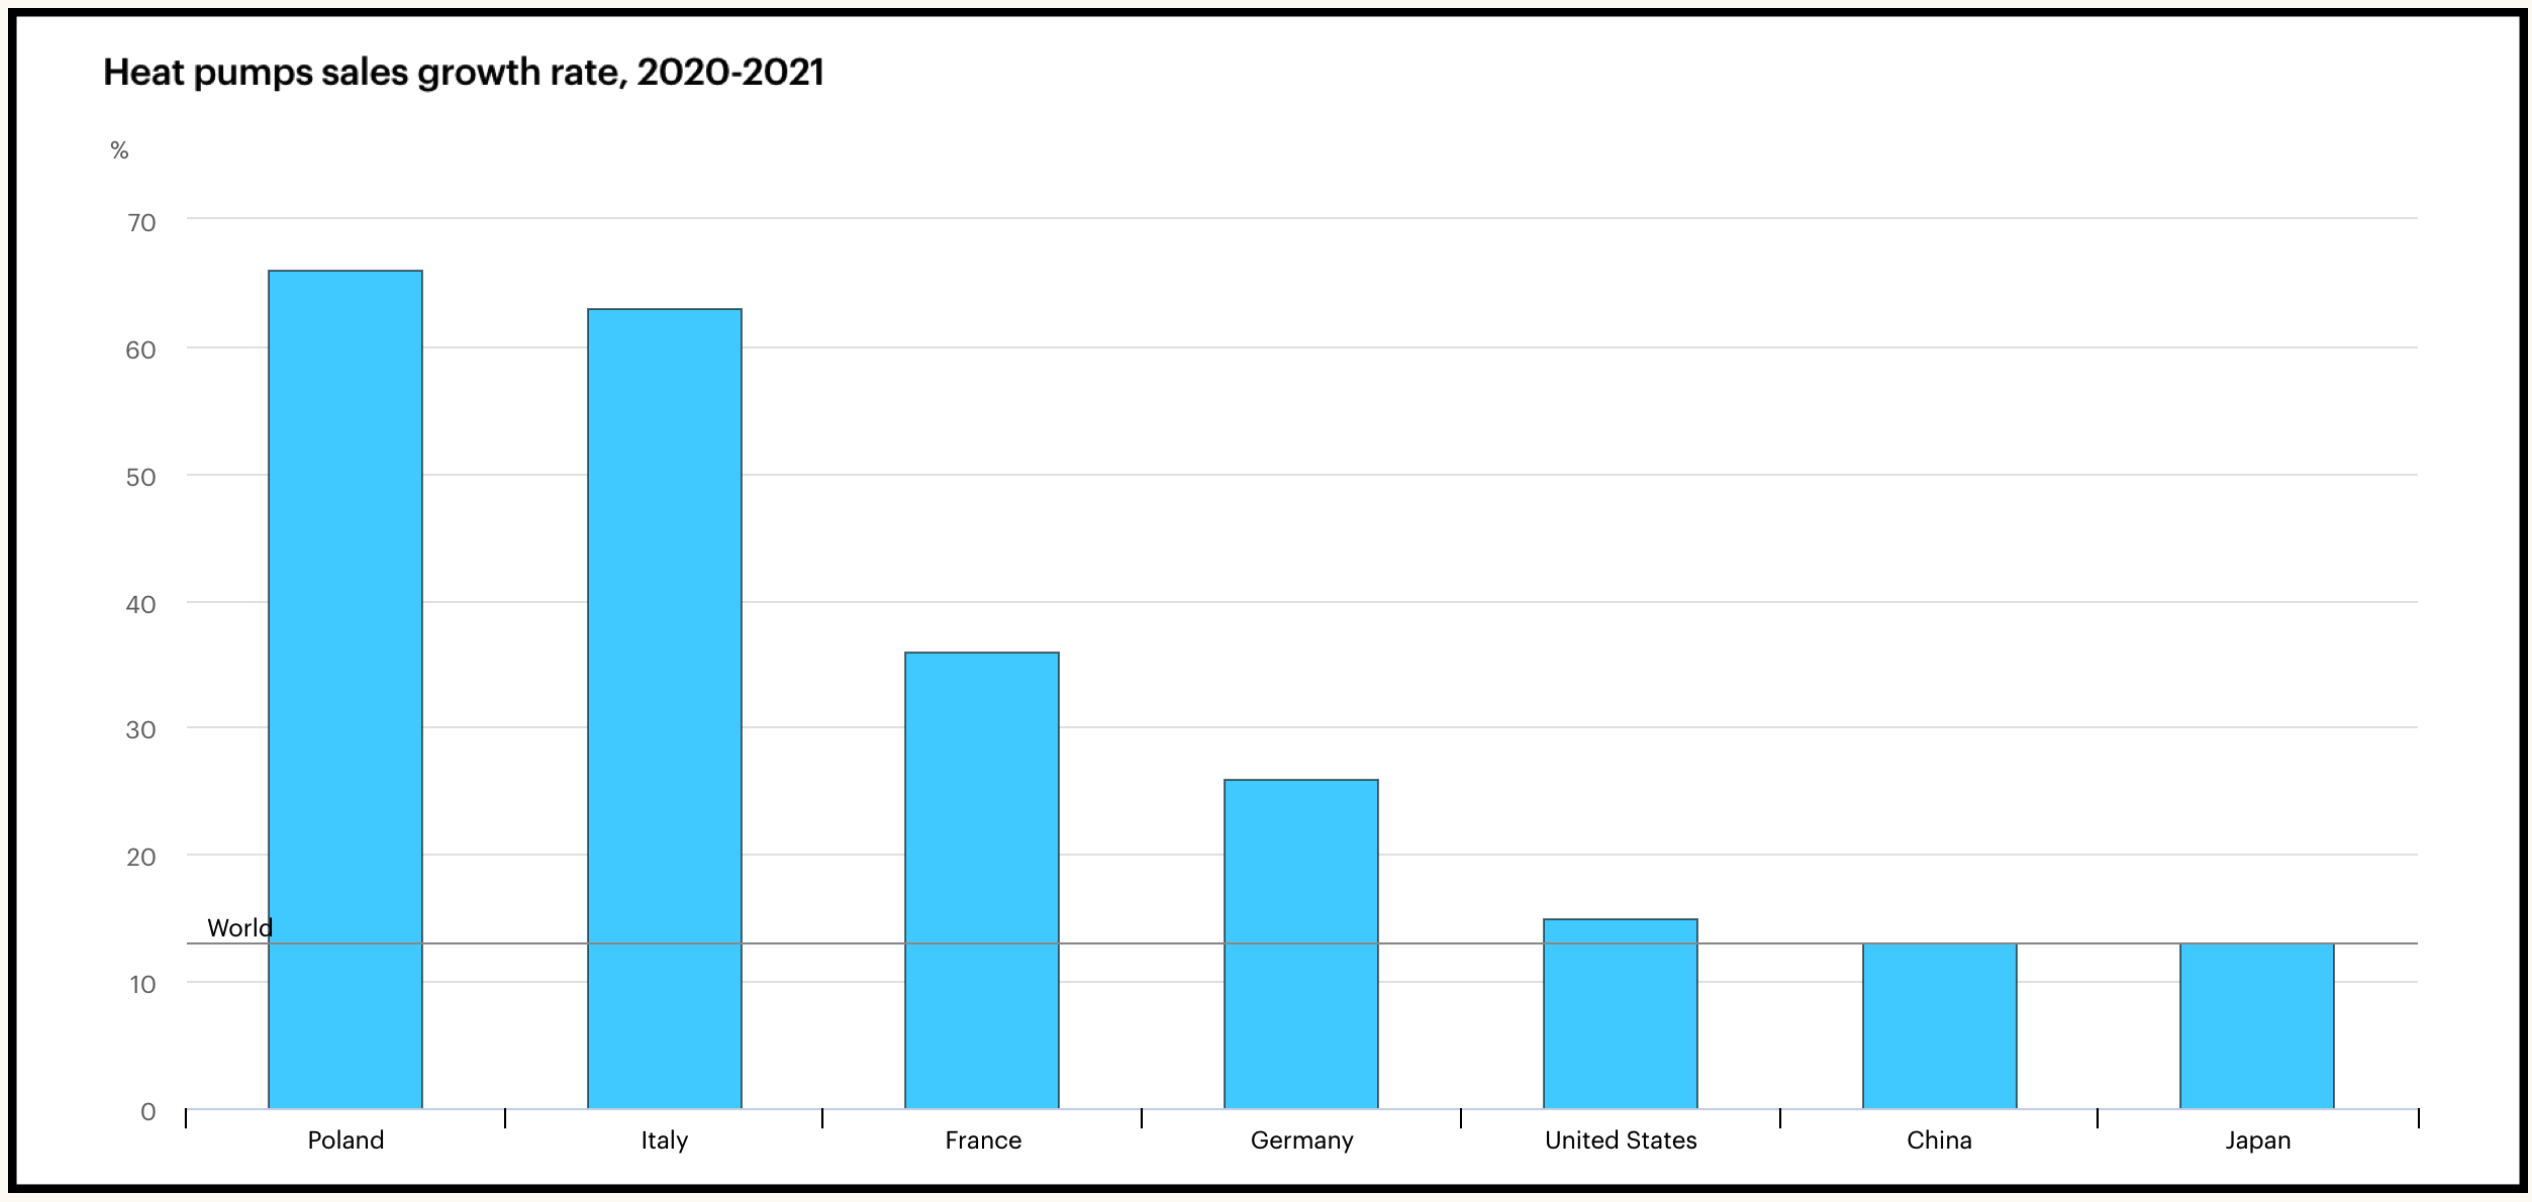 2020-2021 heat pump sales growth rates across several countries.